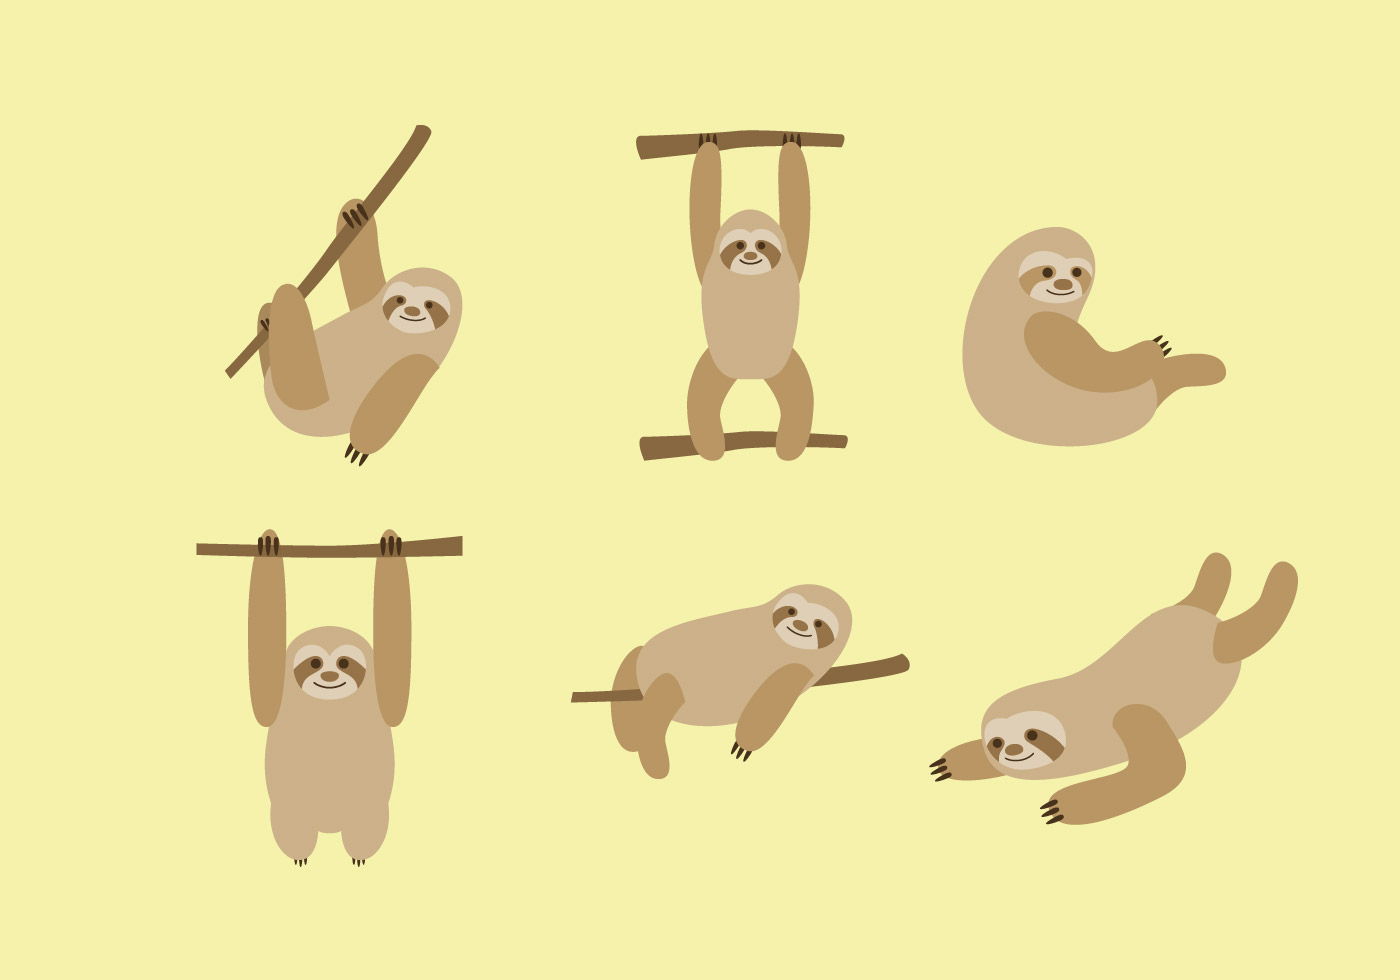 Download Sloth Free Vector Art - (873 Free Downloads)